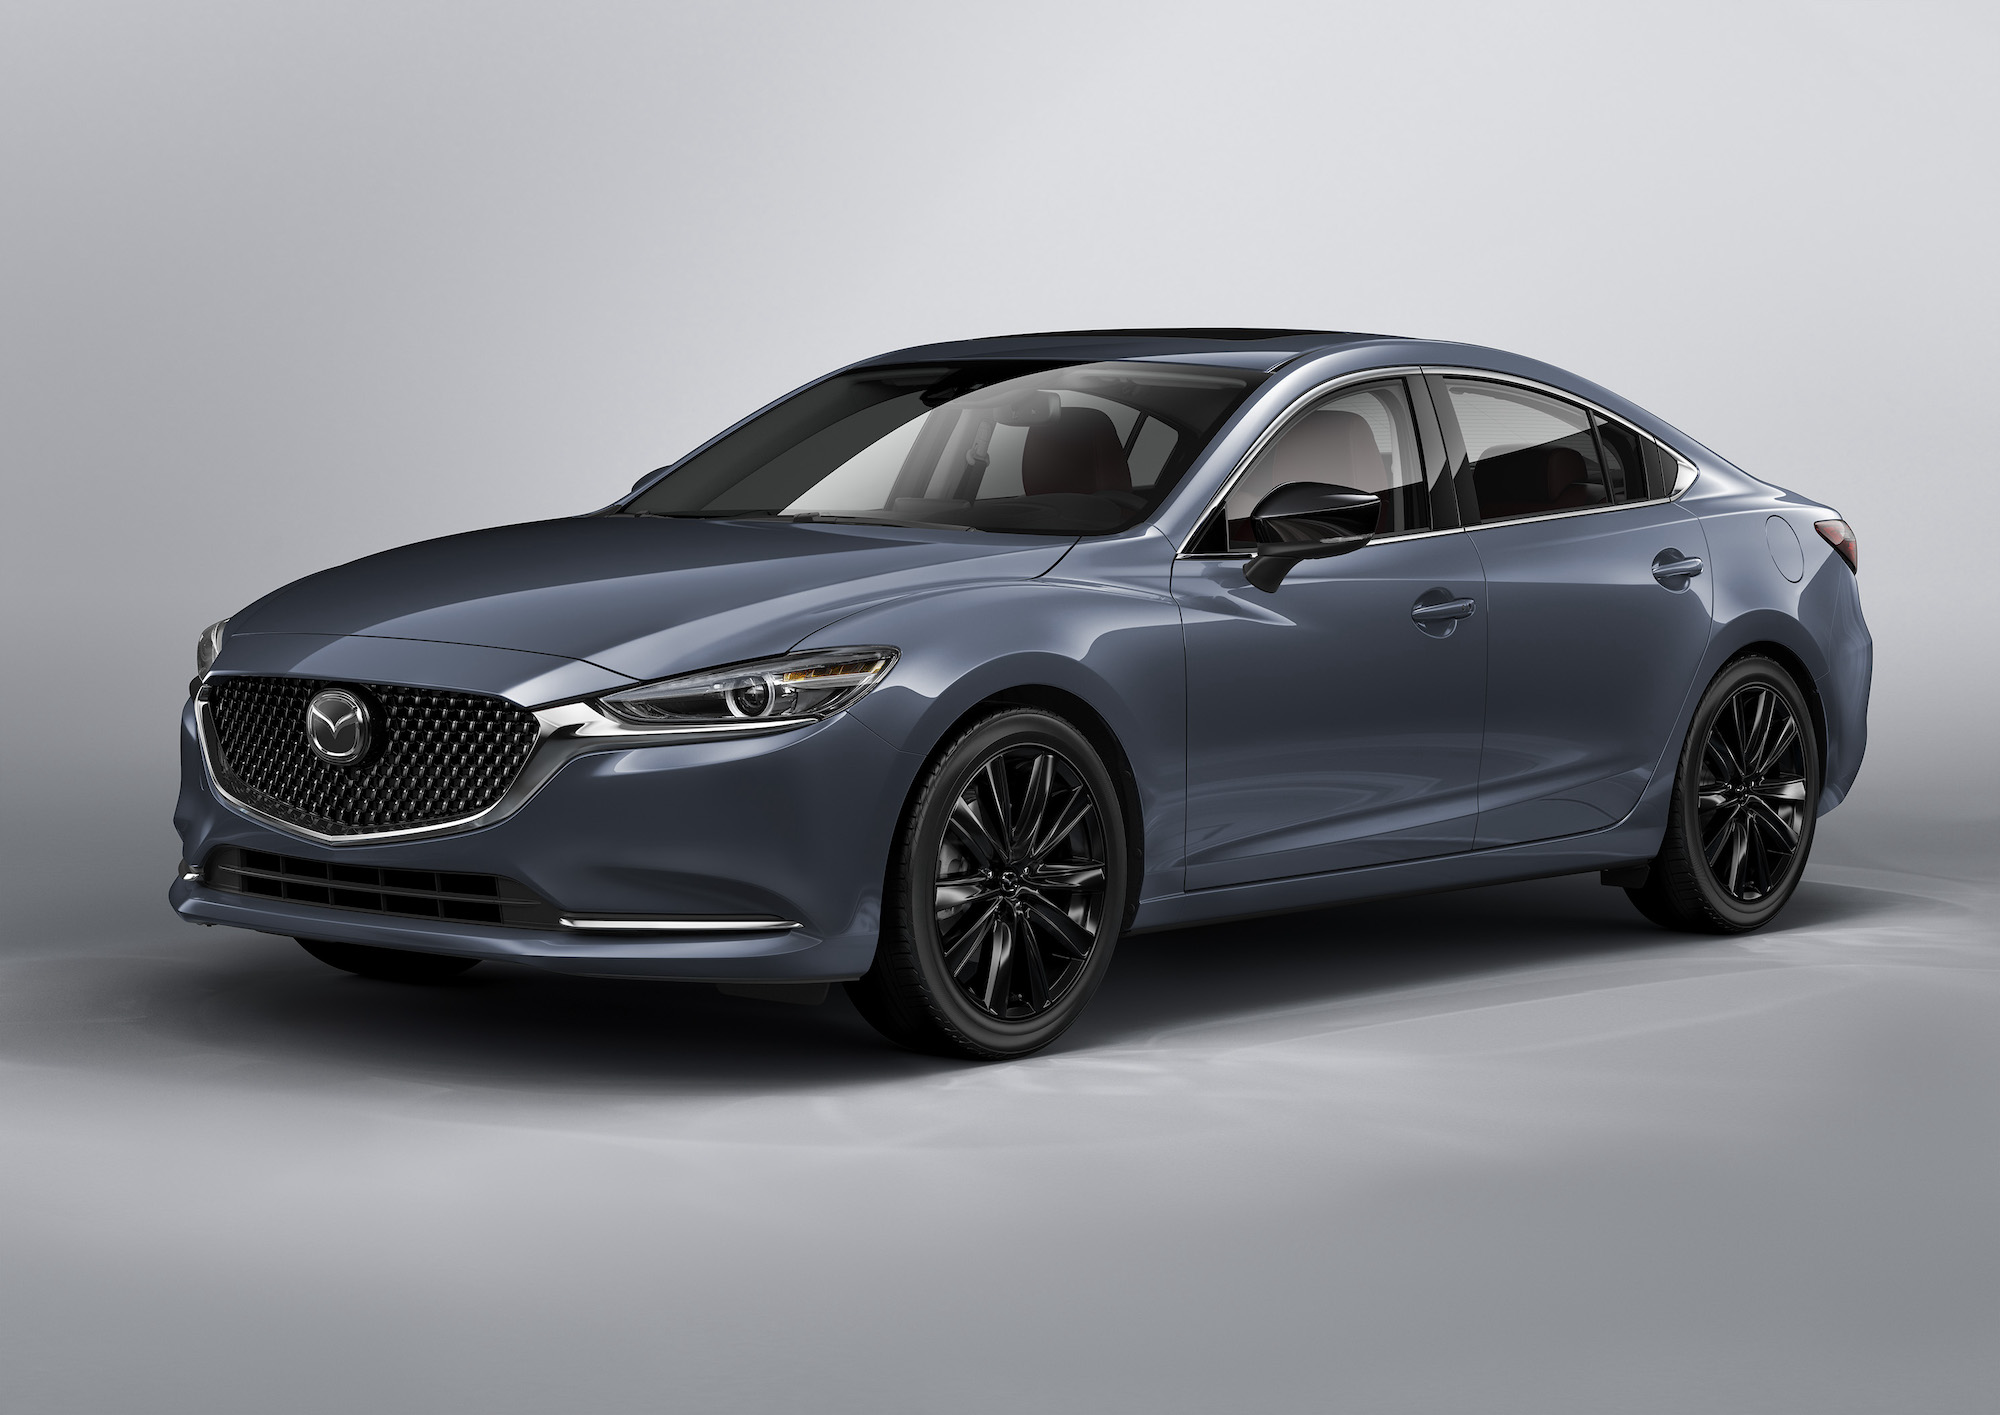 A 2021 Mazda6 Carbon Edition midsize sedan with black wheels, a black grille, and gray metallic body paint